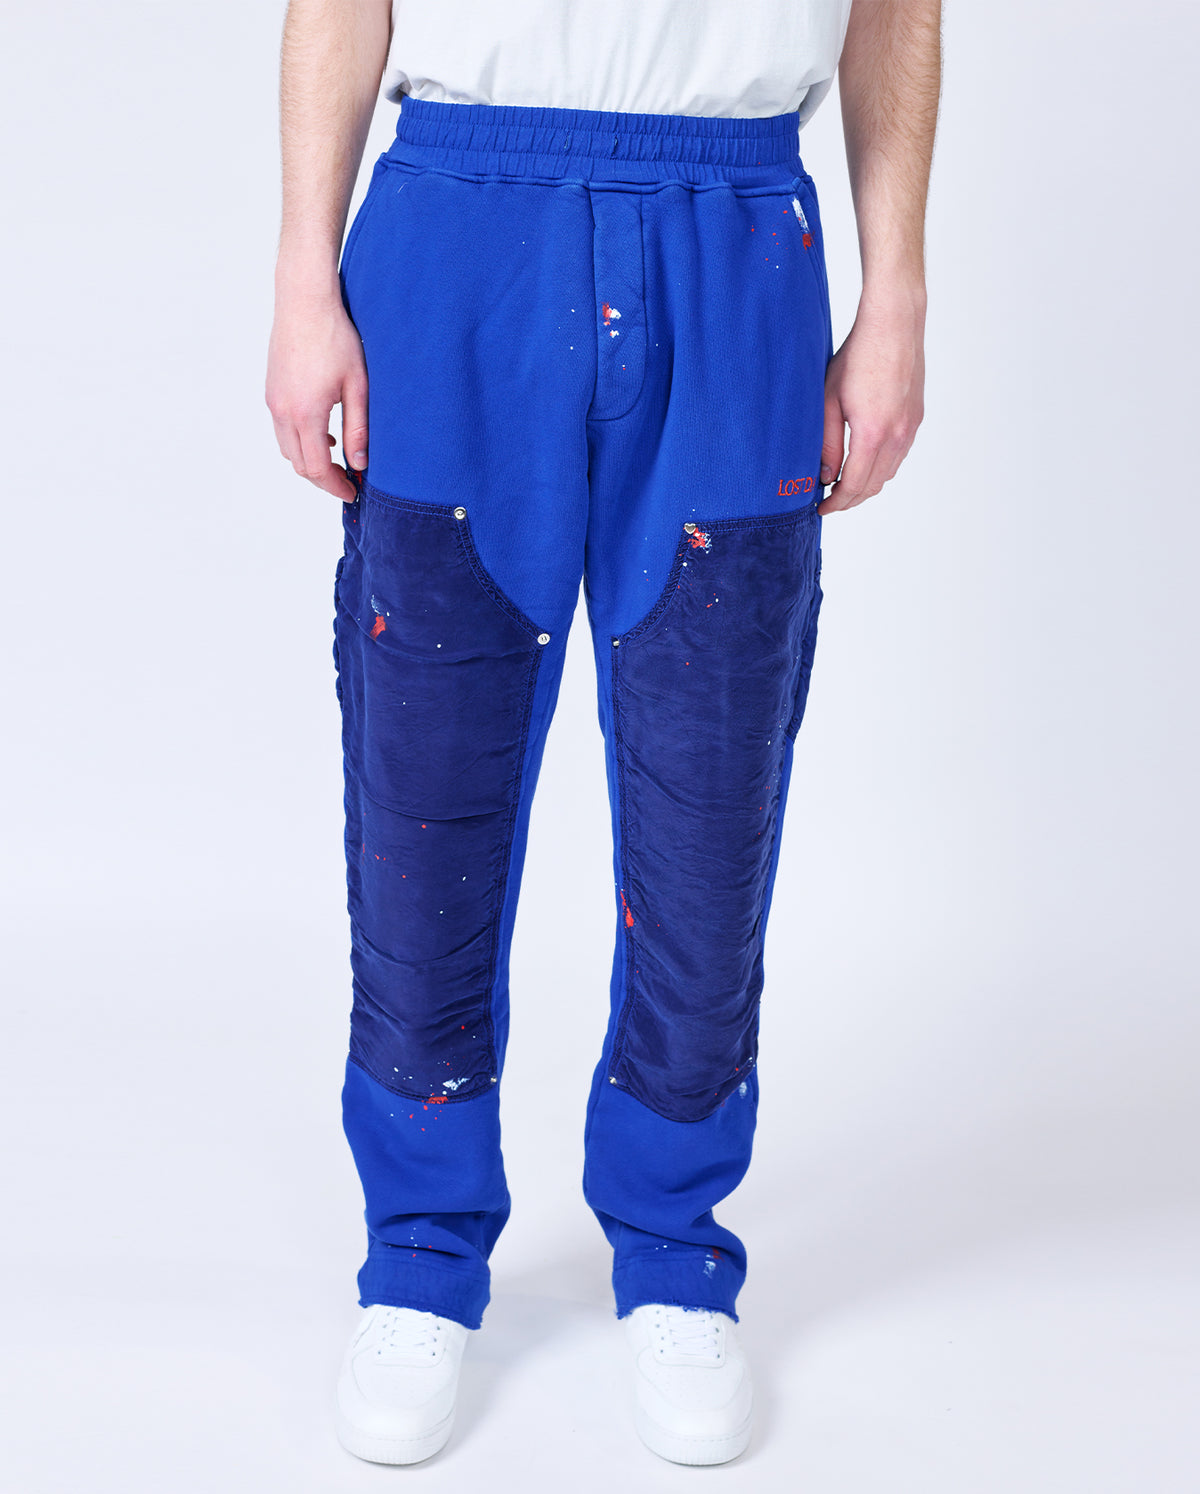 Fred Segal Exclusive Navy Sweatpant